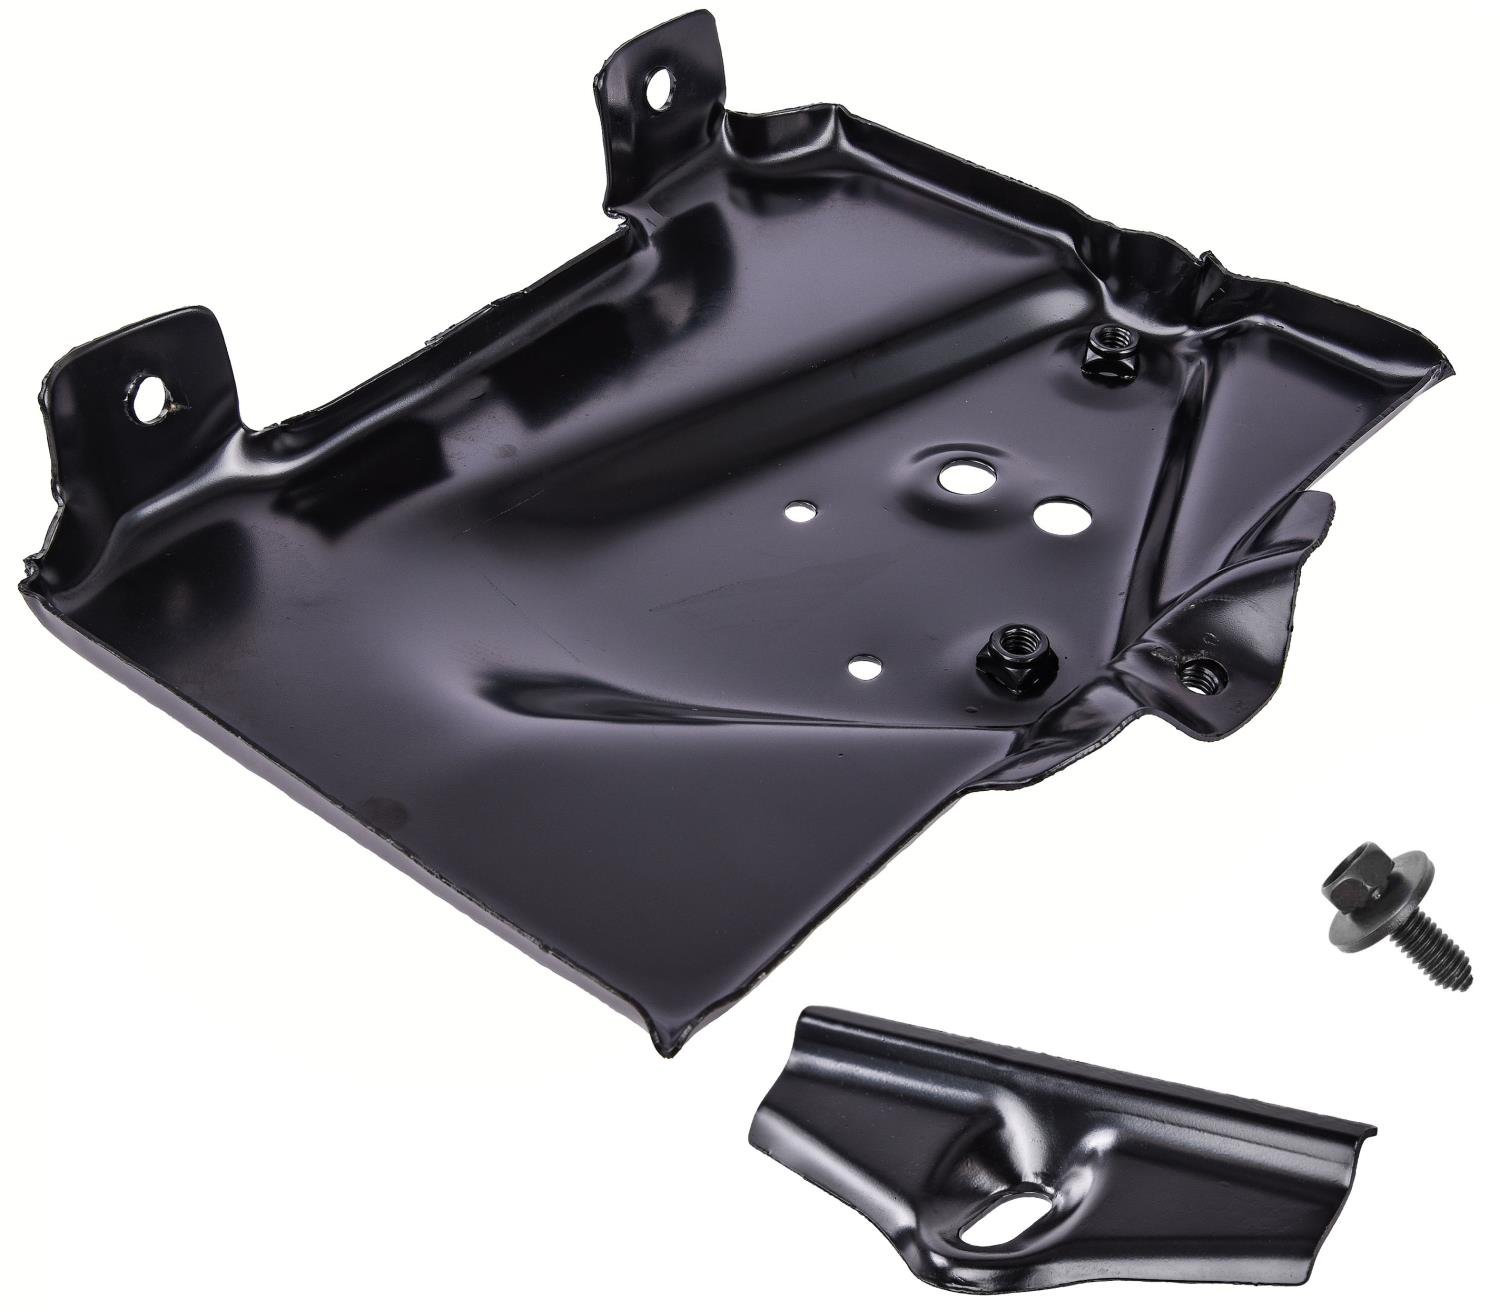 Battery Tray Kit for 1966 Chevy Biscayne, Chevelle,